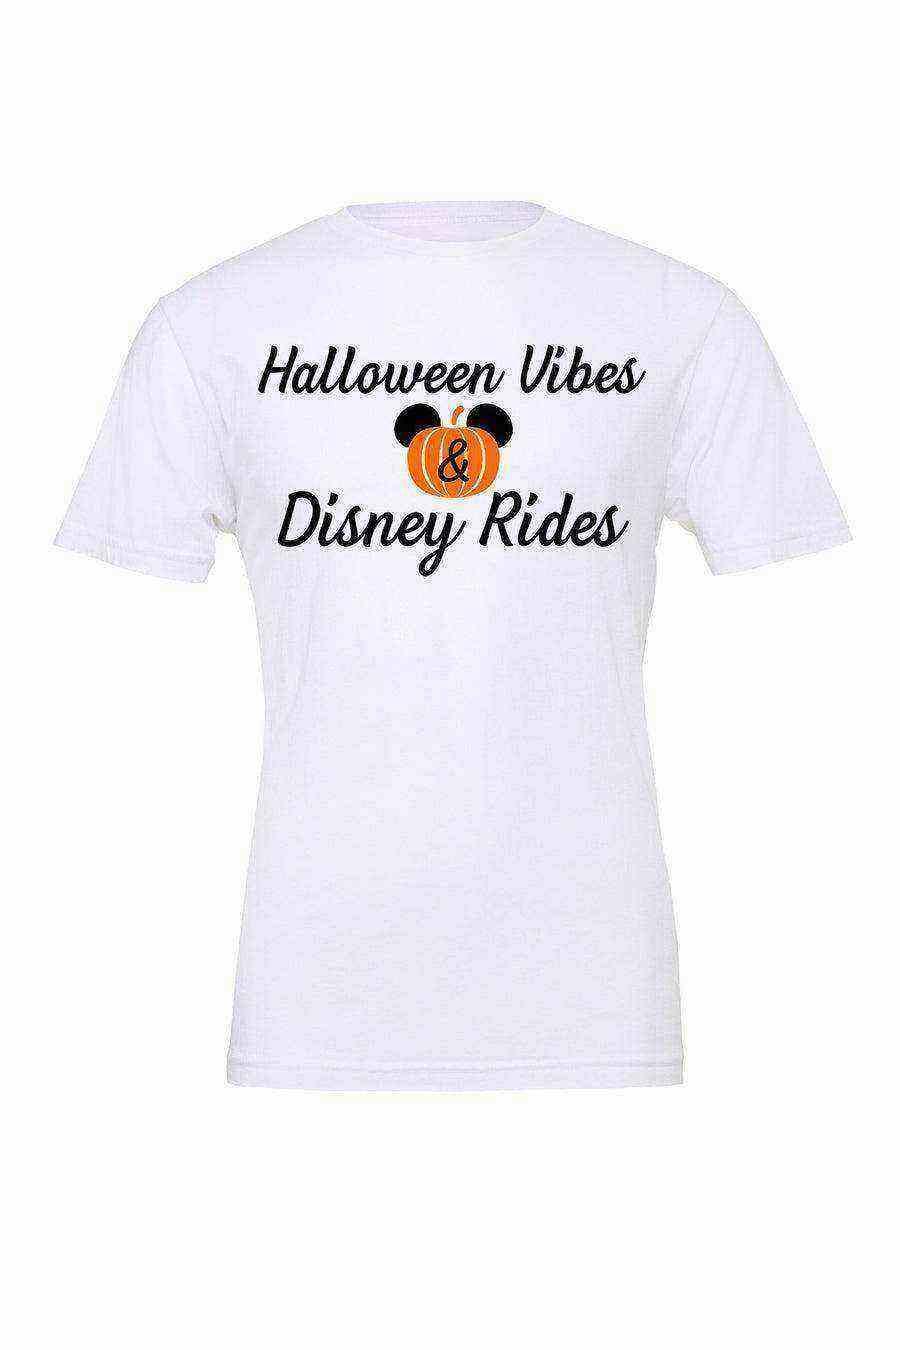 Youth | Halloween Vibes and Rides Shirt - Dylan's Tees